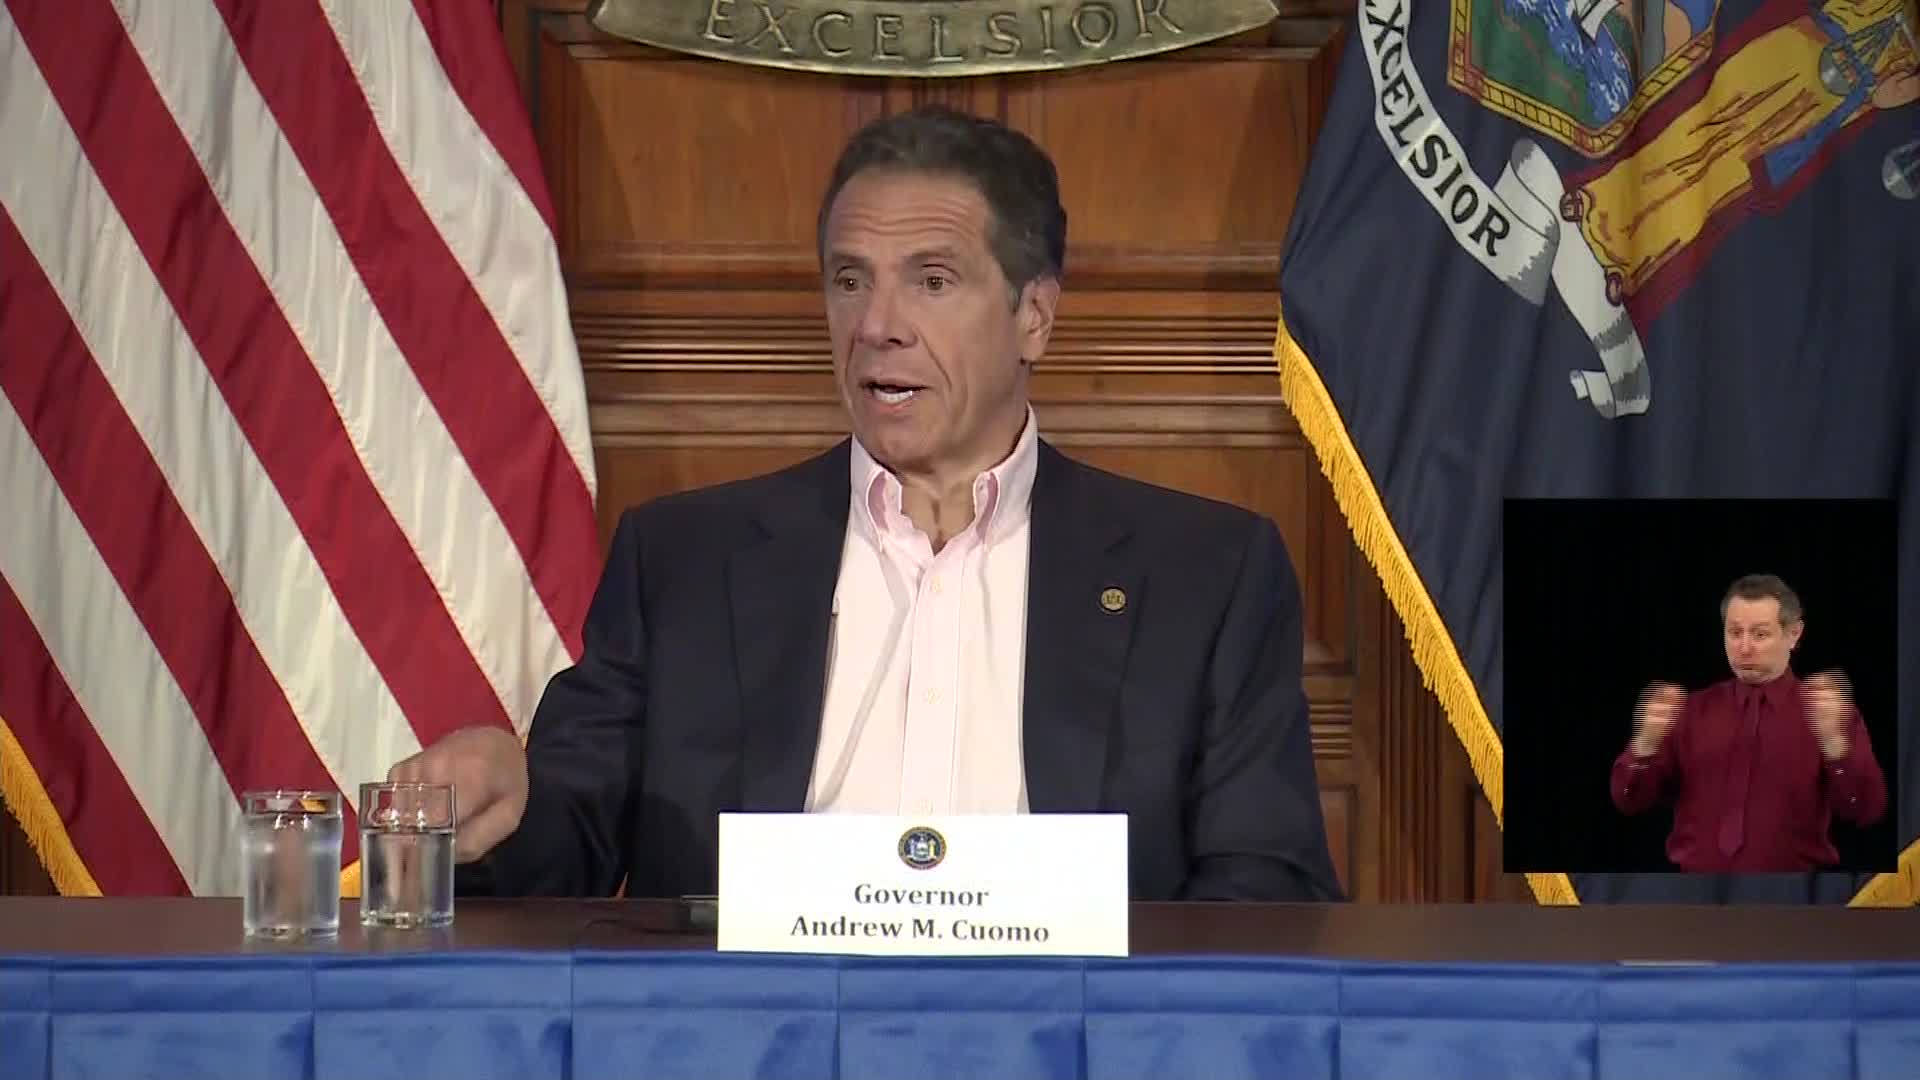 New York Gov. Andrew Cuomo speaks during a press conference in Albany, New York, on August 19.